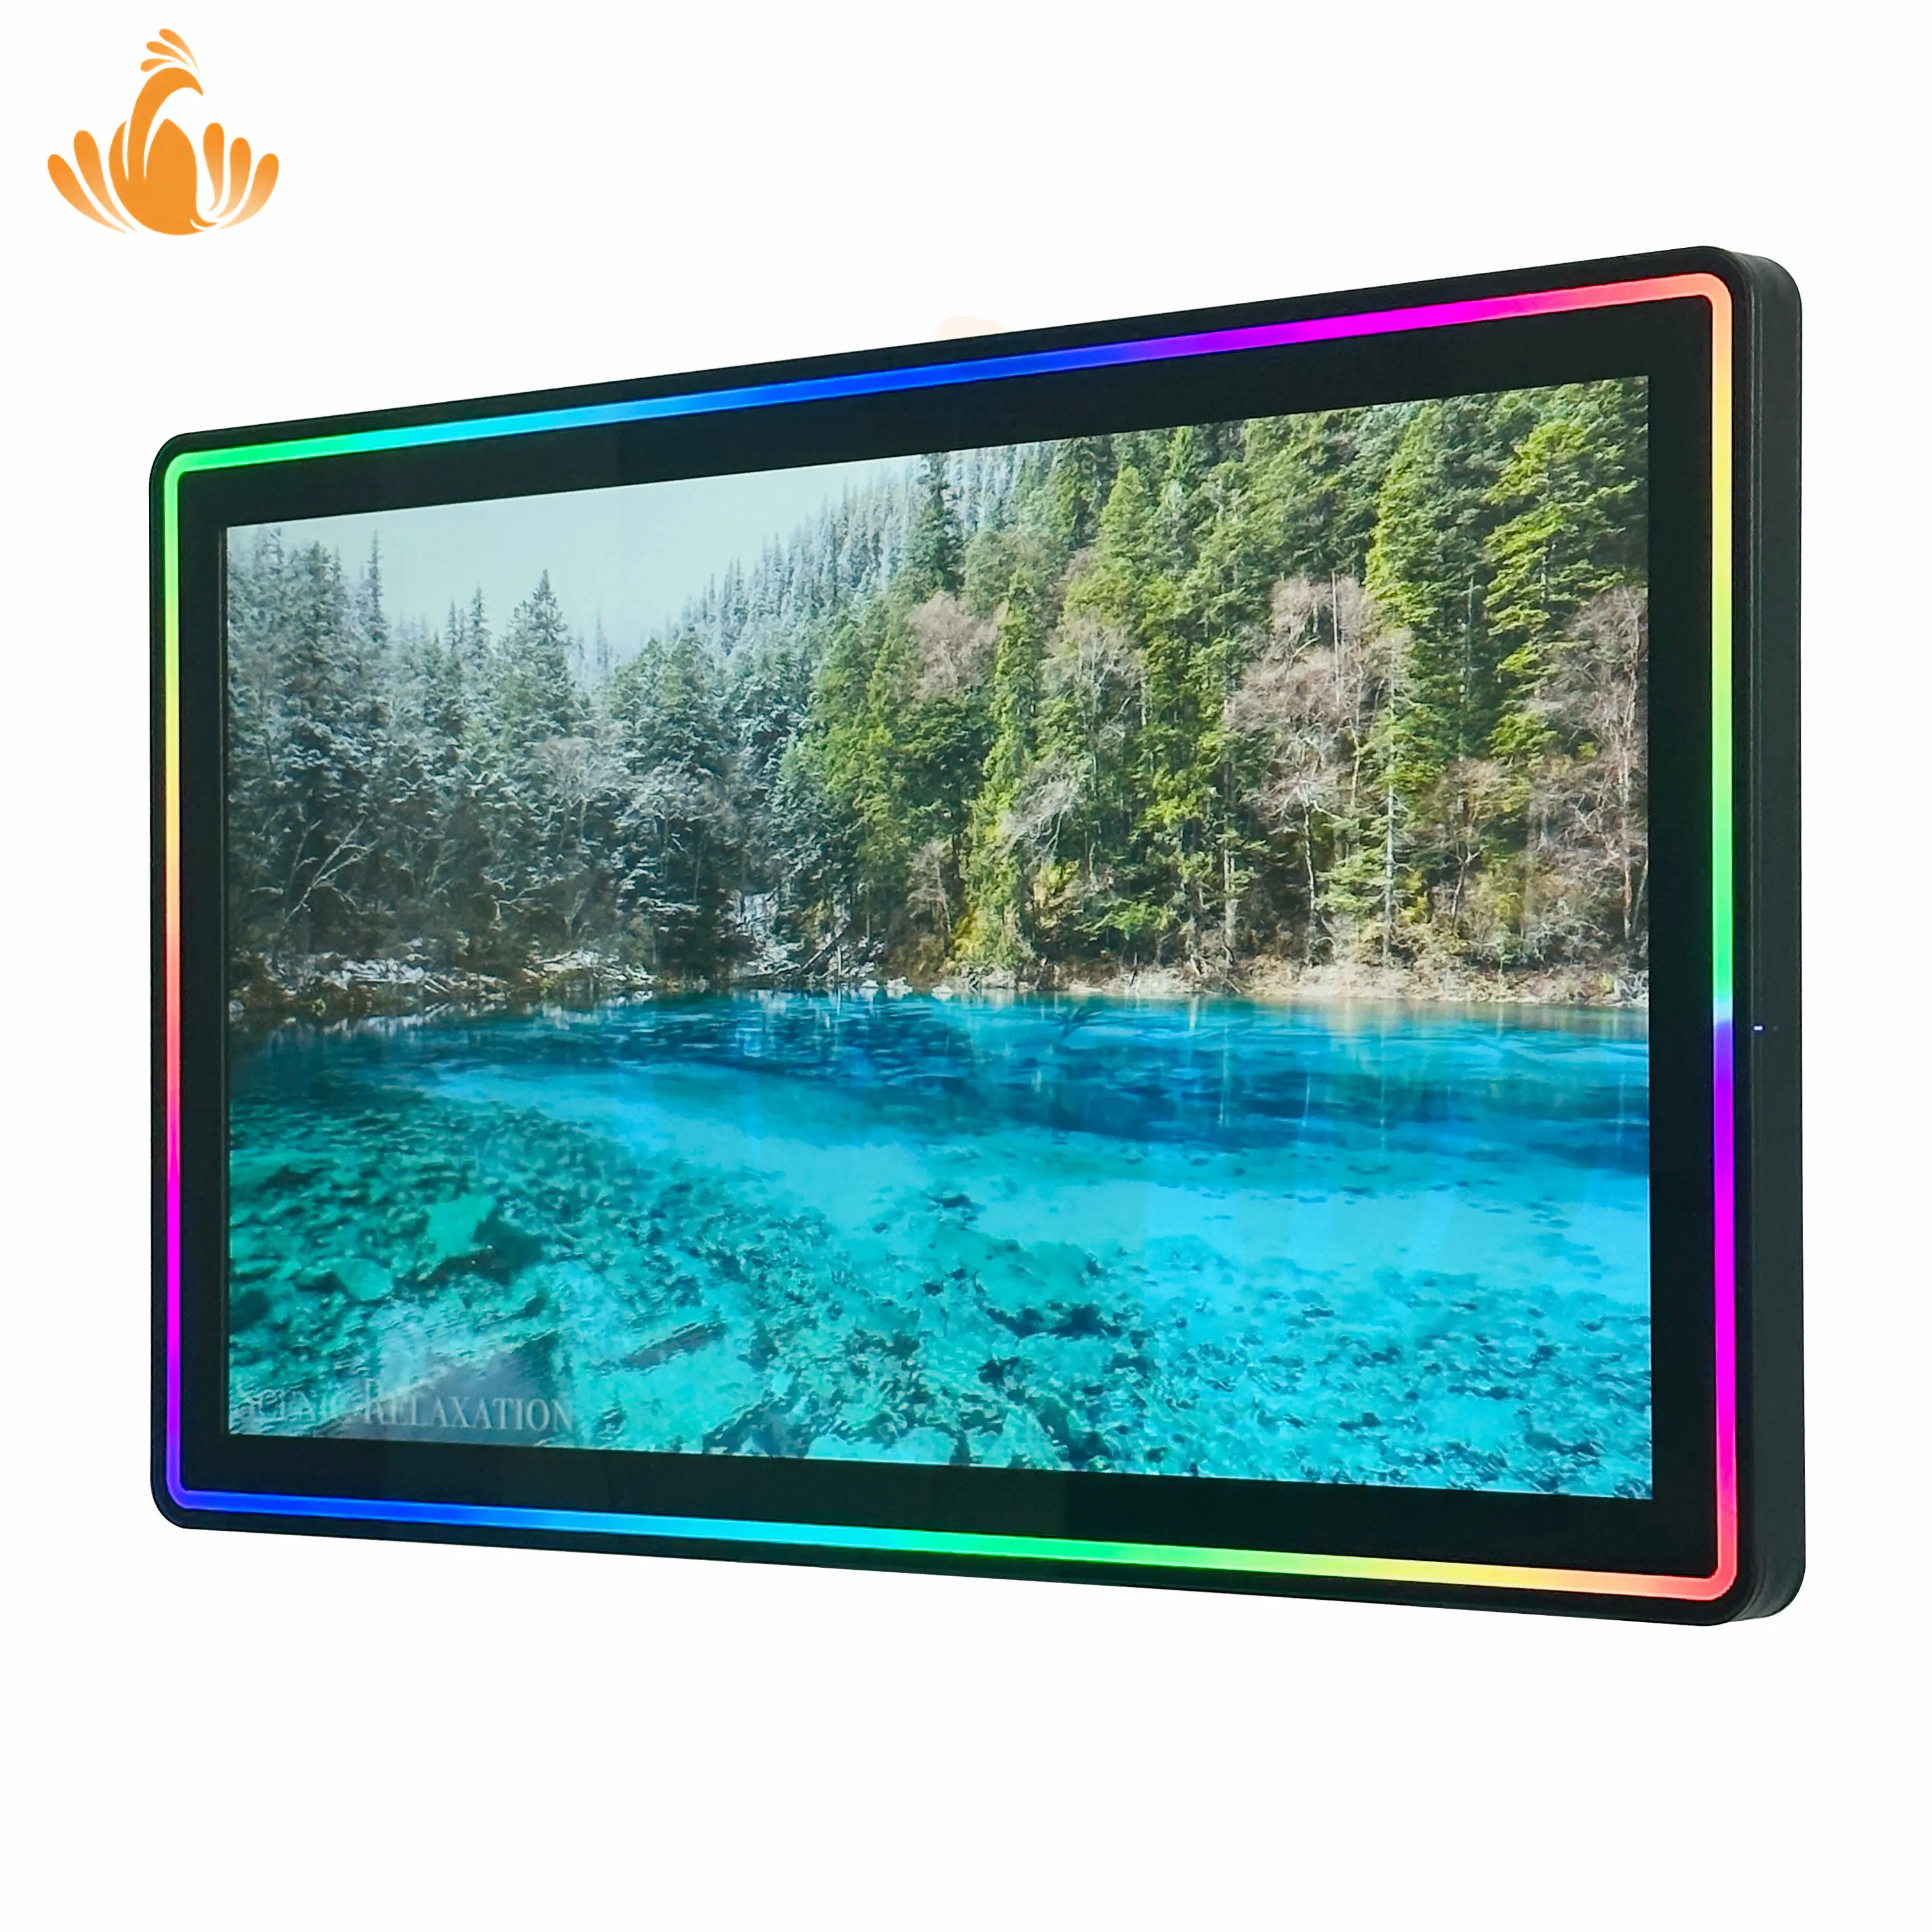 27 inch vertical capacitive led aluminum bezel life of luxury fireball original taiwan game board touch monitor